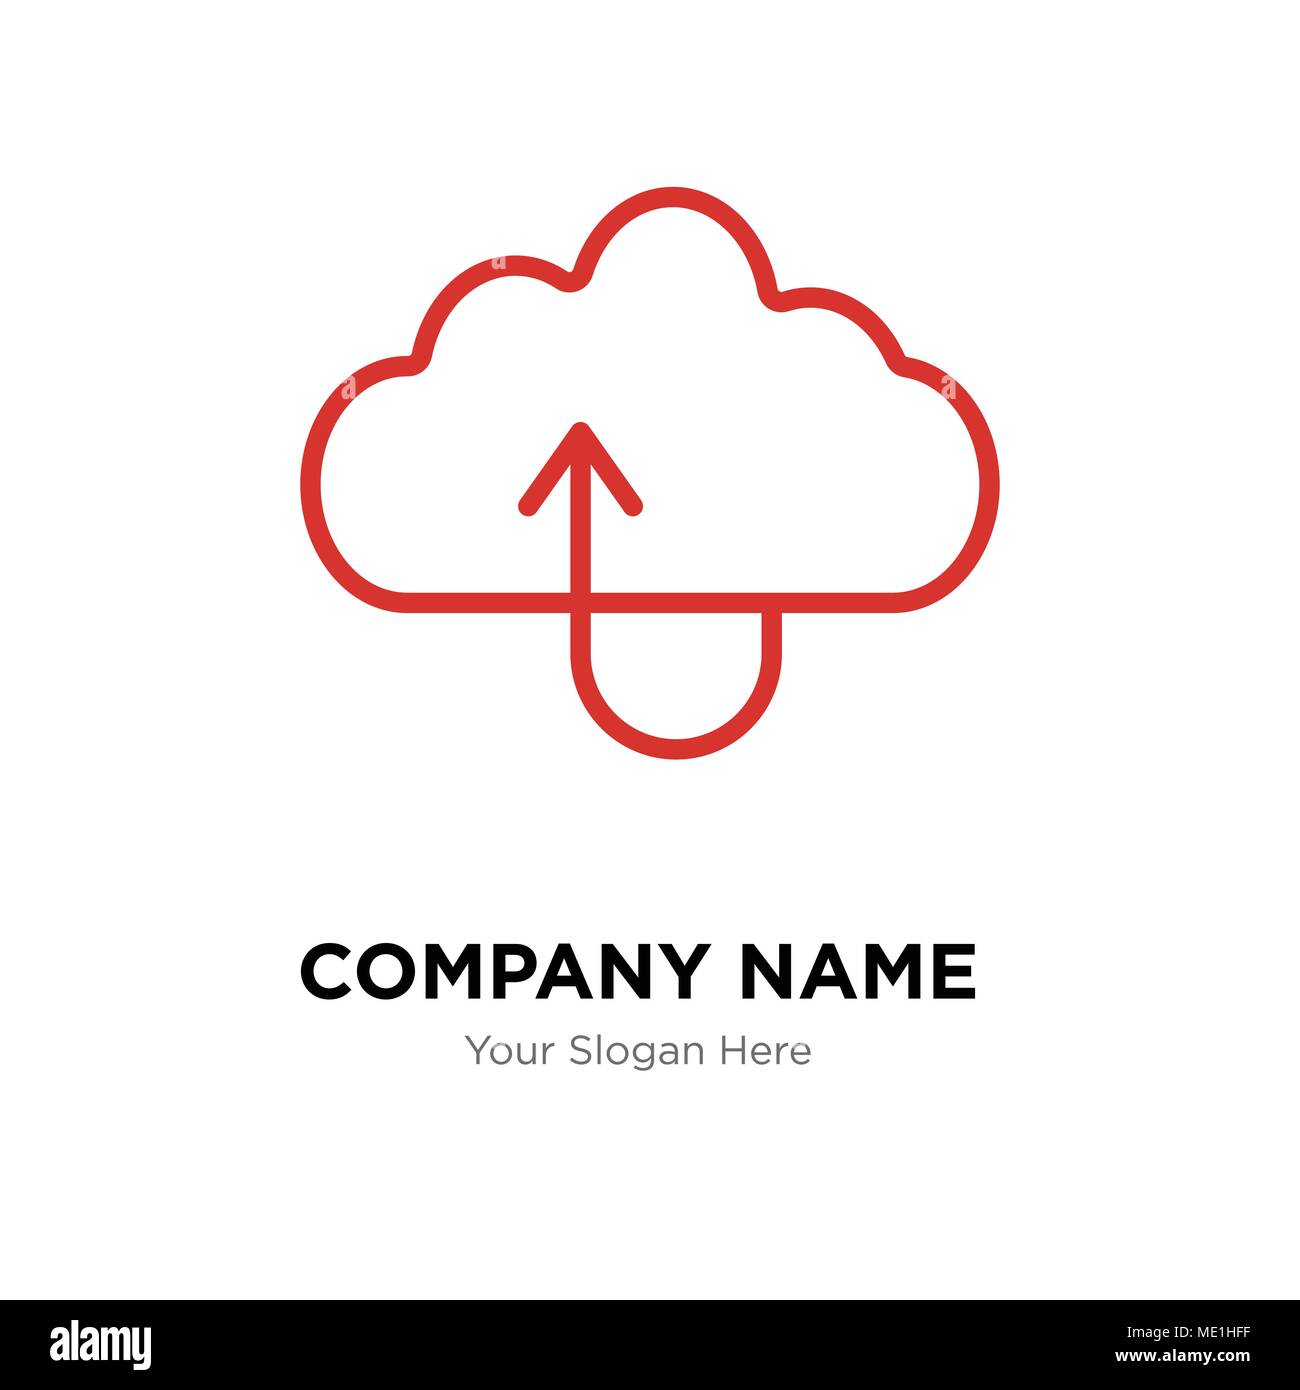 Uploading files to the cloud company logo design template, Business corporate vector icon Stock Vector